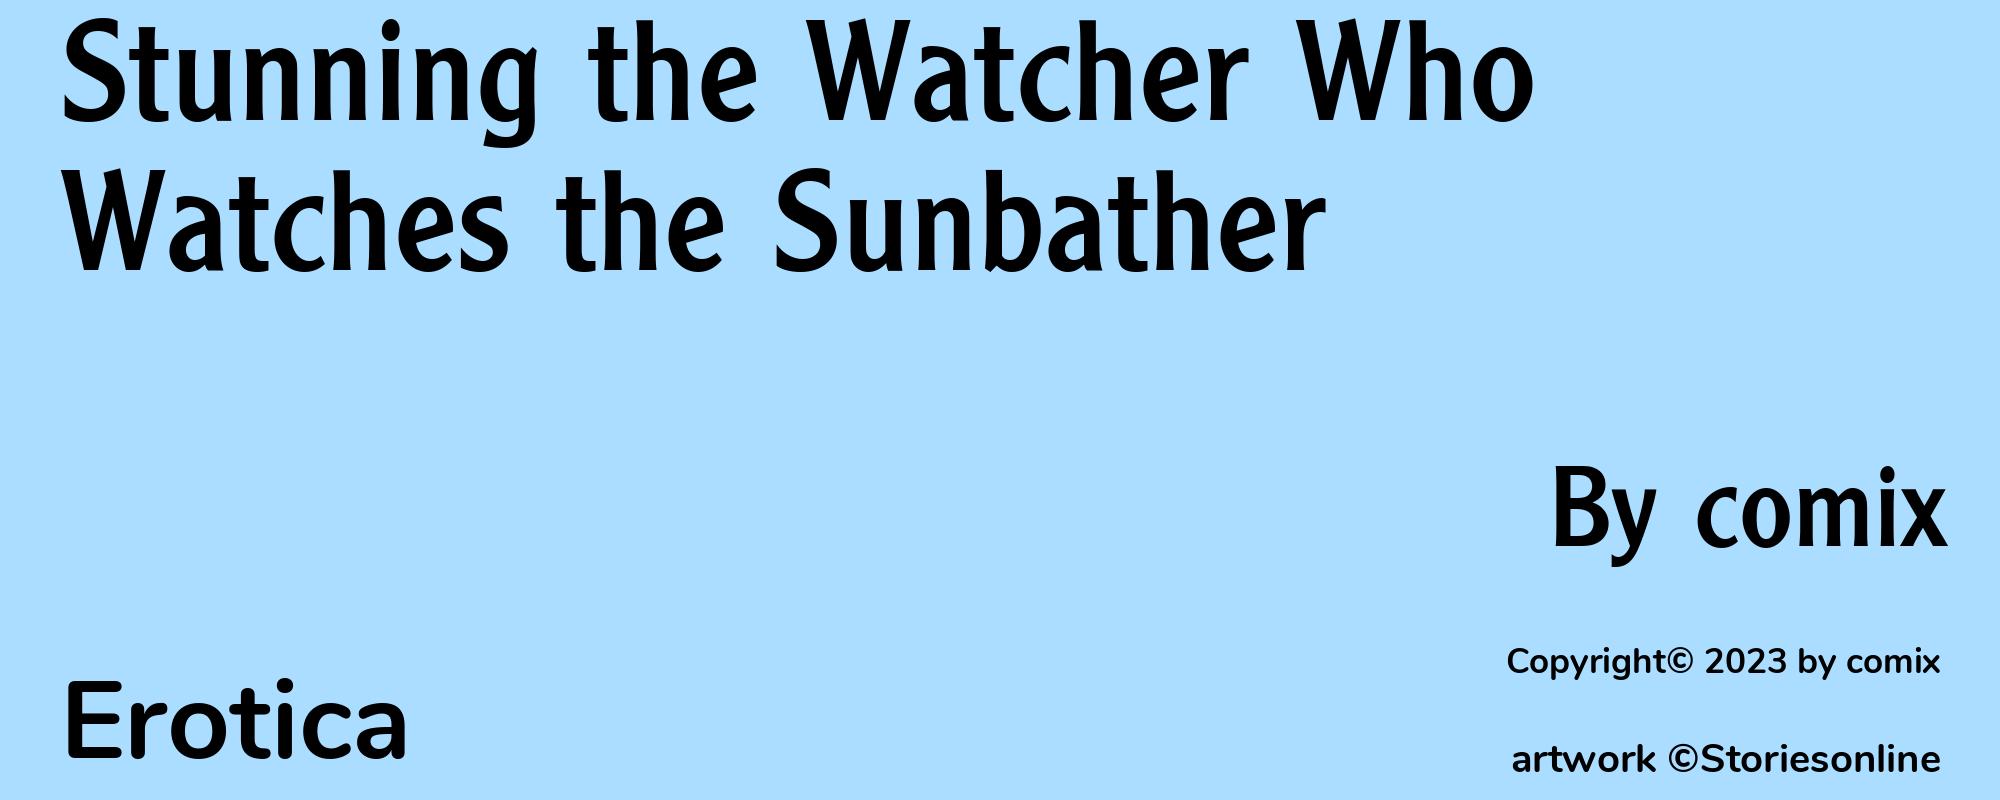 Stunning the Watcher Who Watches the Sunbather - Cover